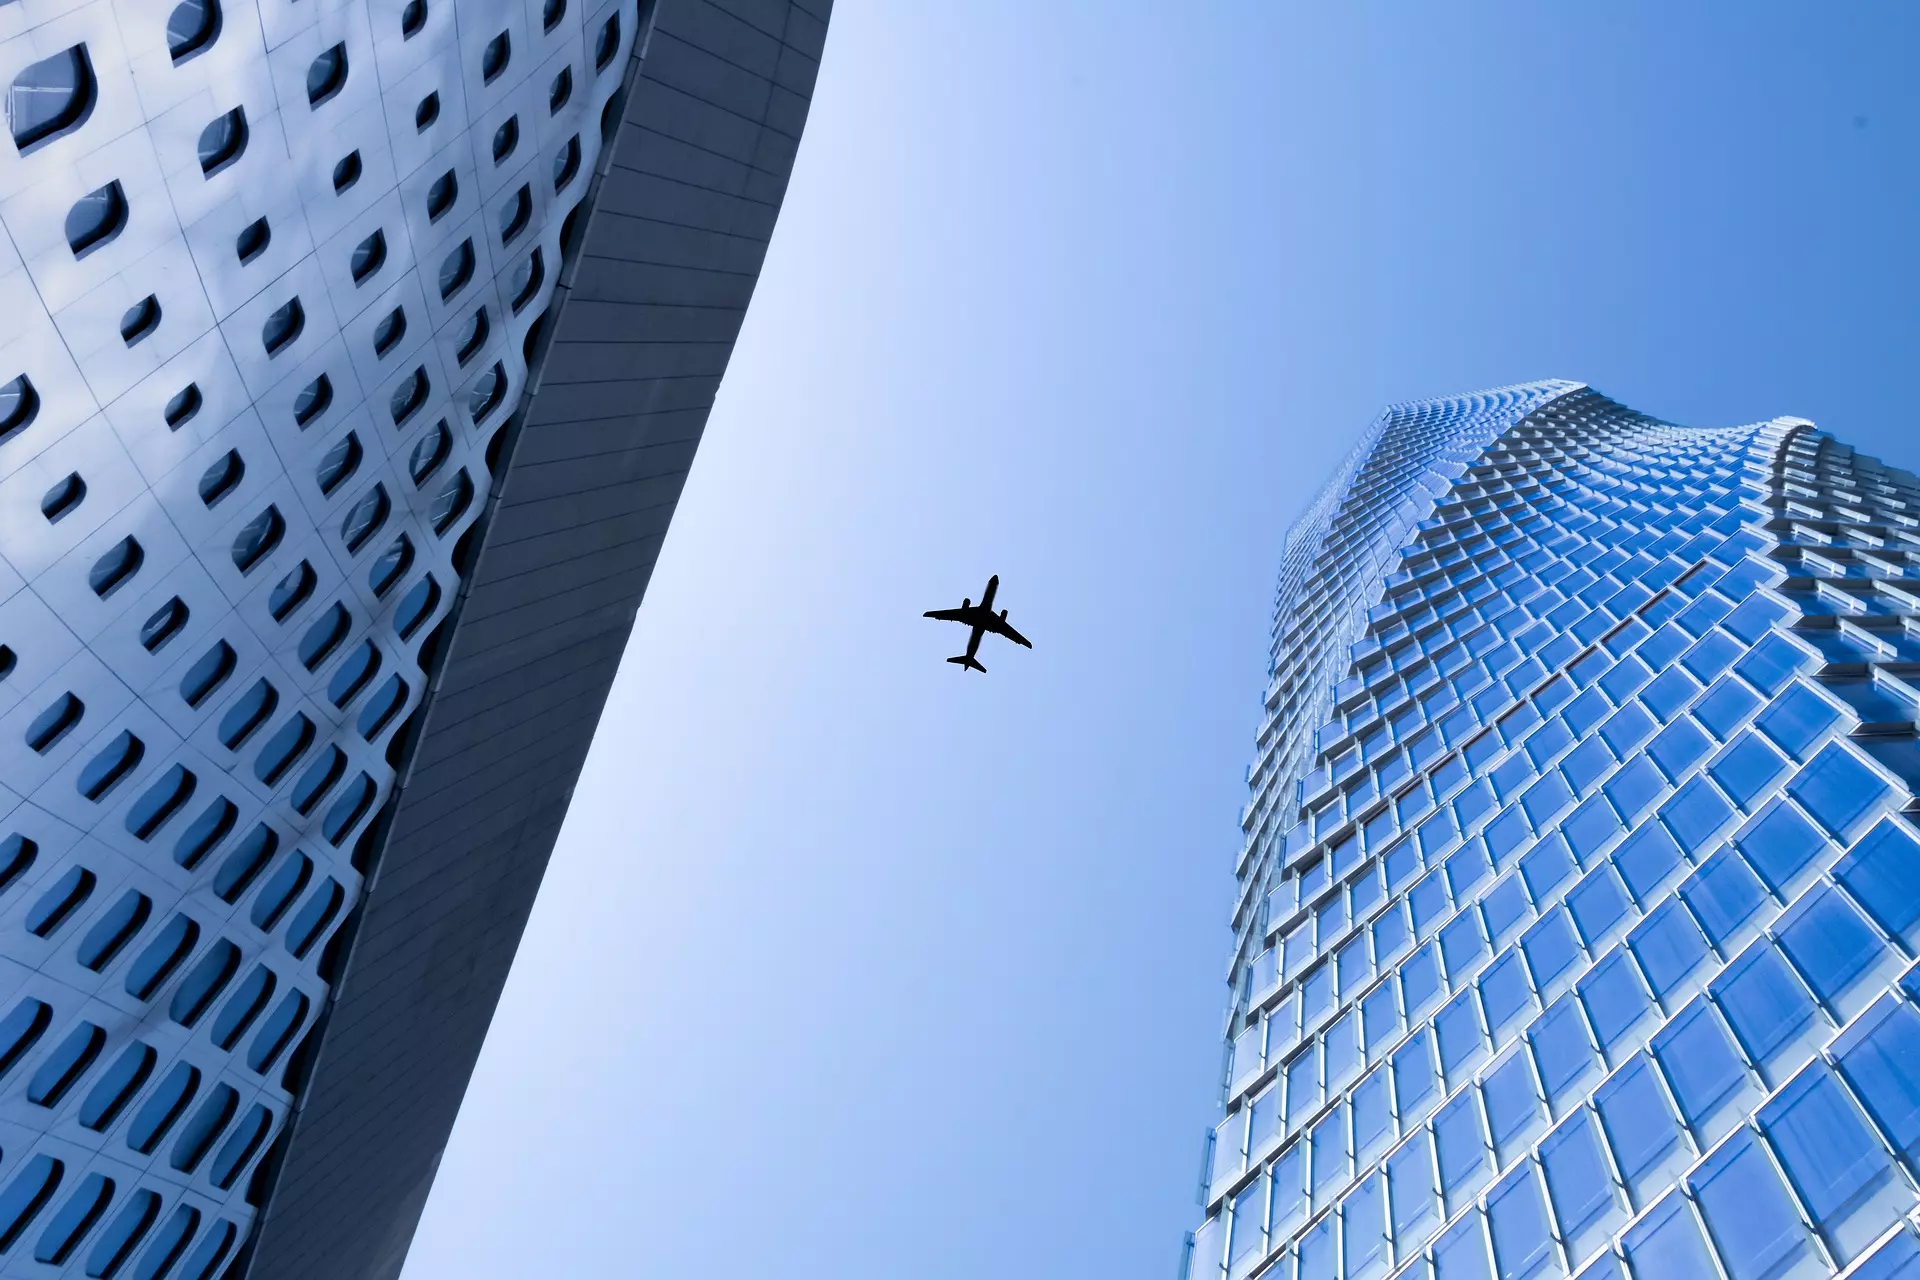 Skyscrapers viewed from below with aircraft silhouetted against blue sky